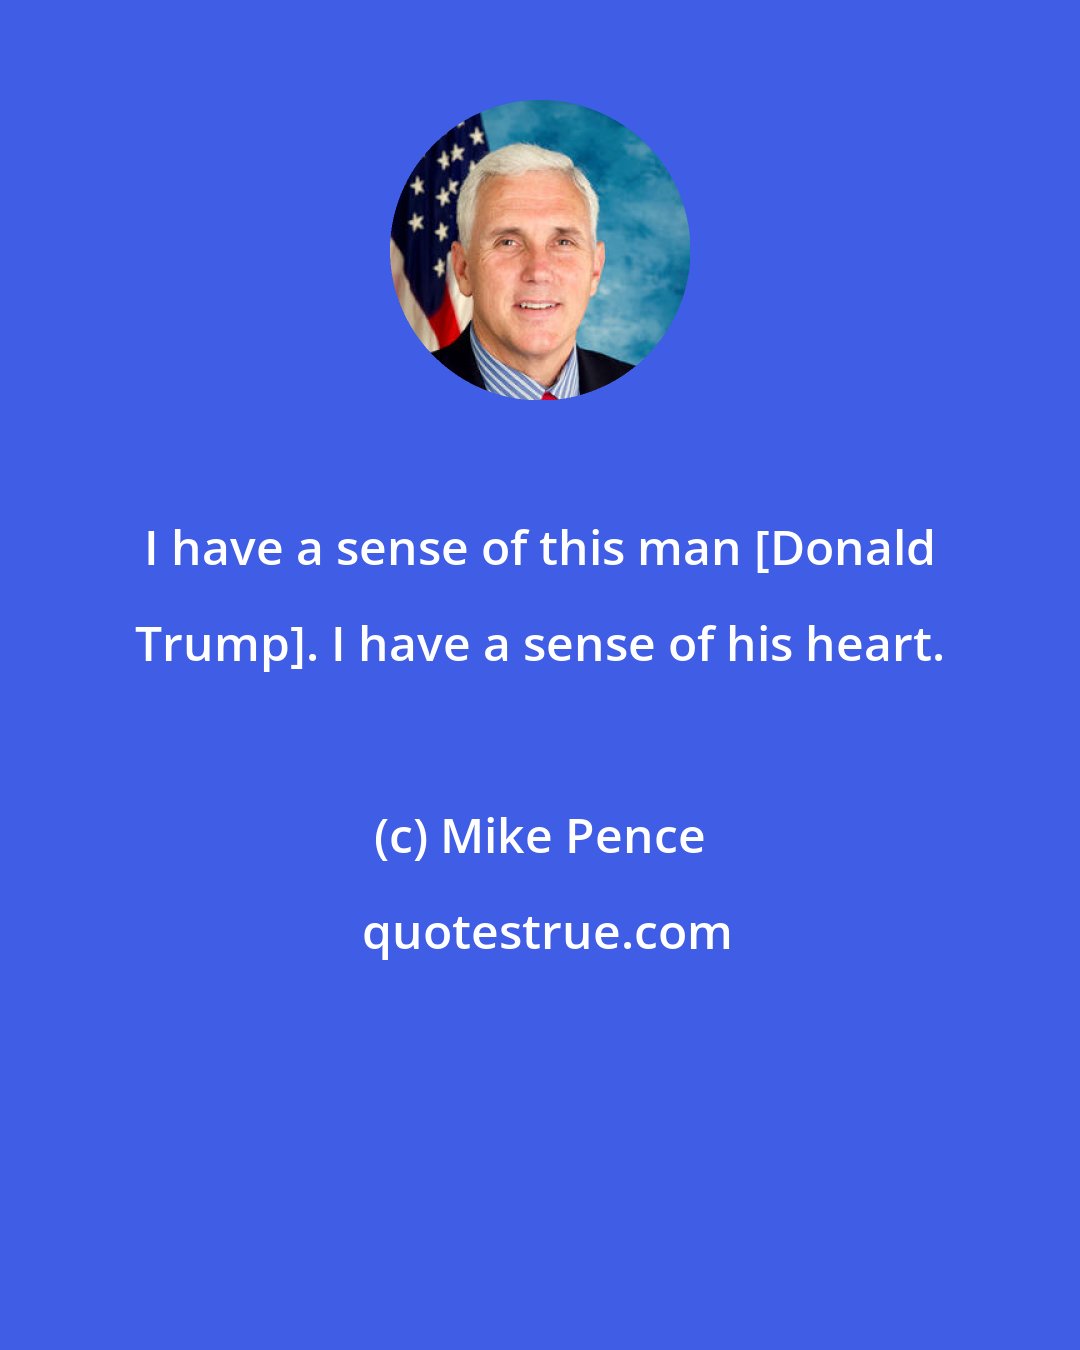 Mike Pence: I have a sense of this man [Donald Trump]. I have a sense of his heart.